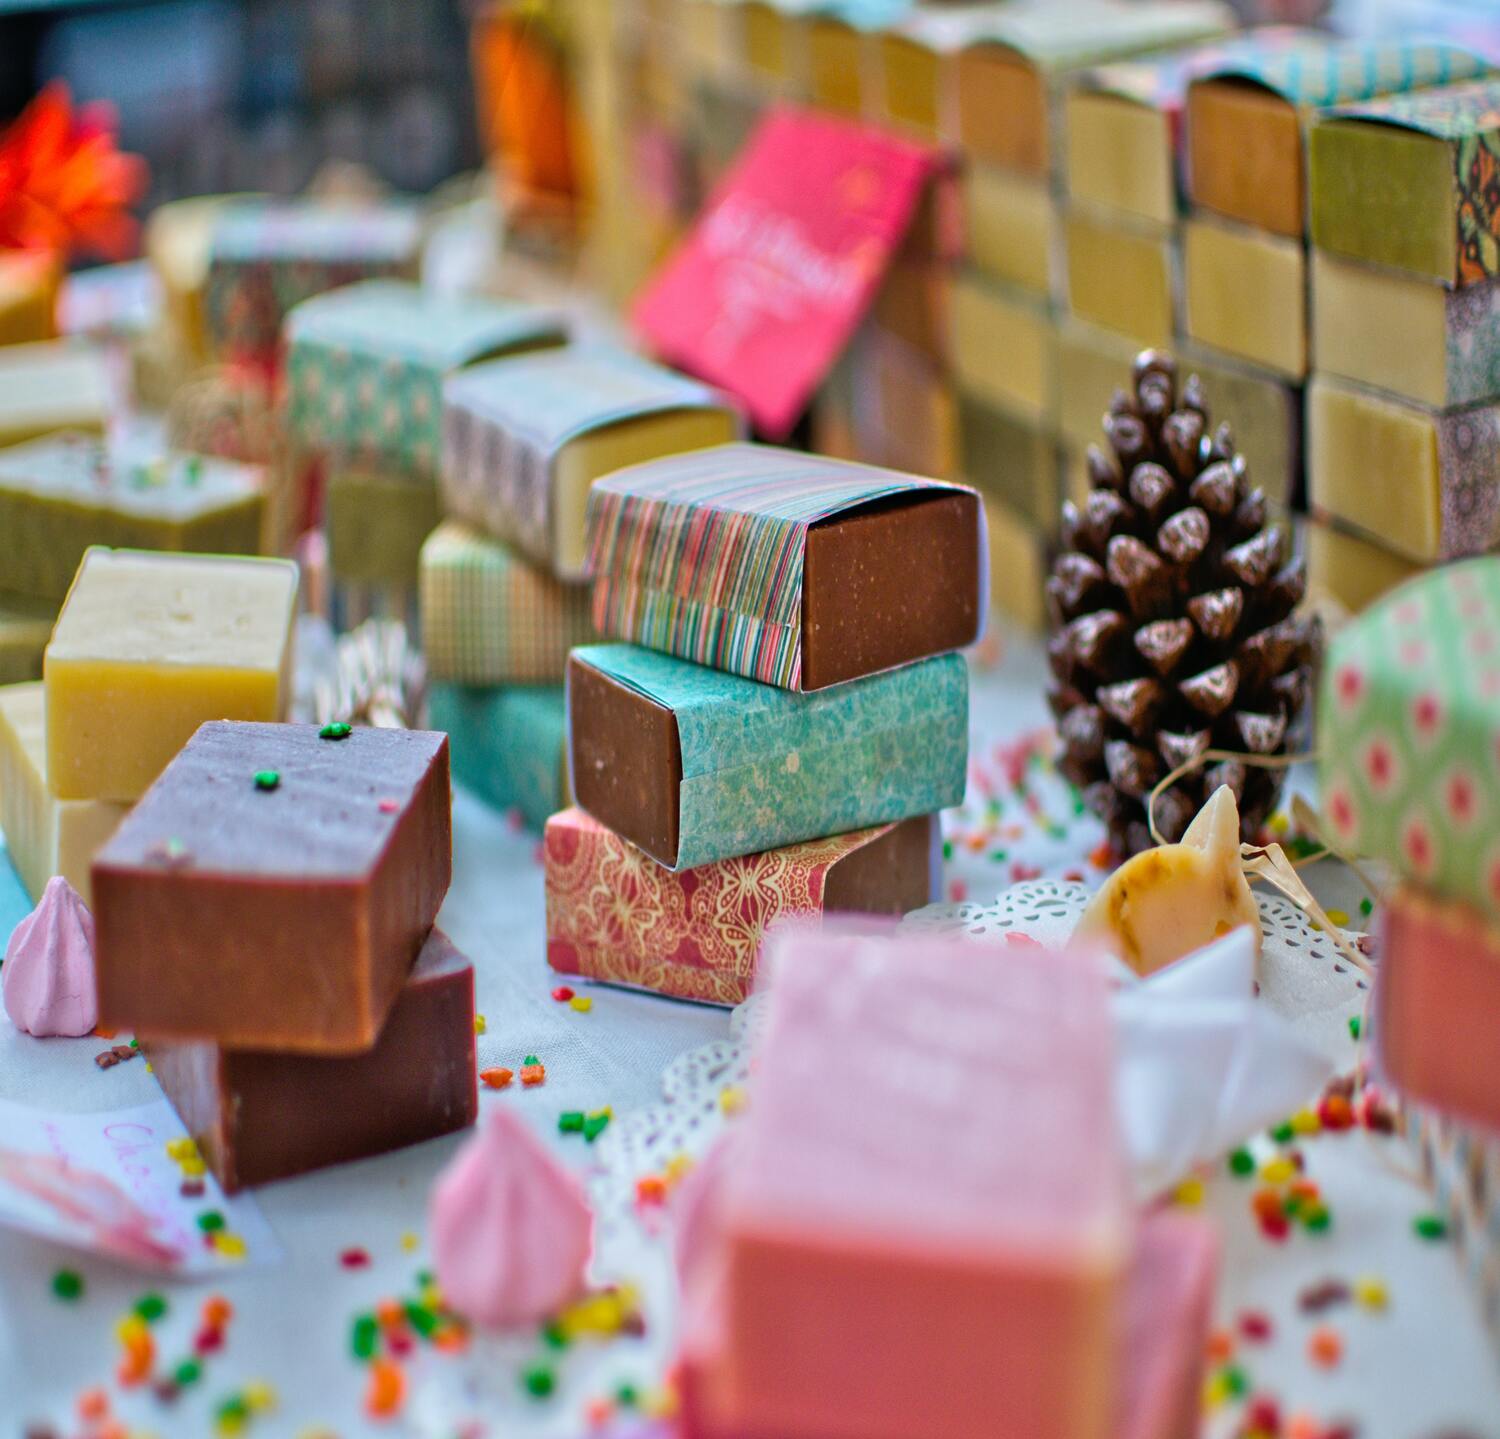 A display of homemade soap